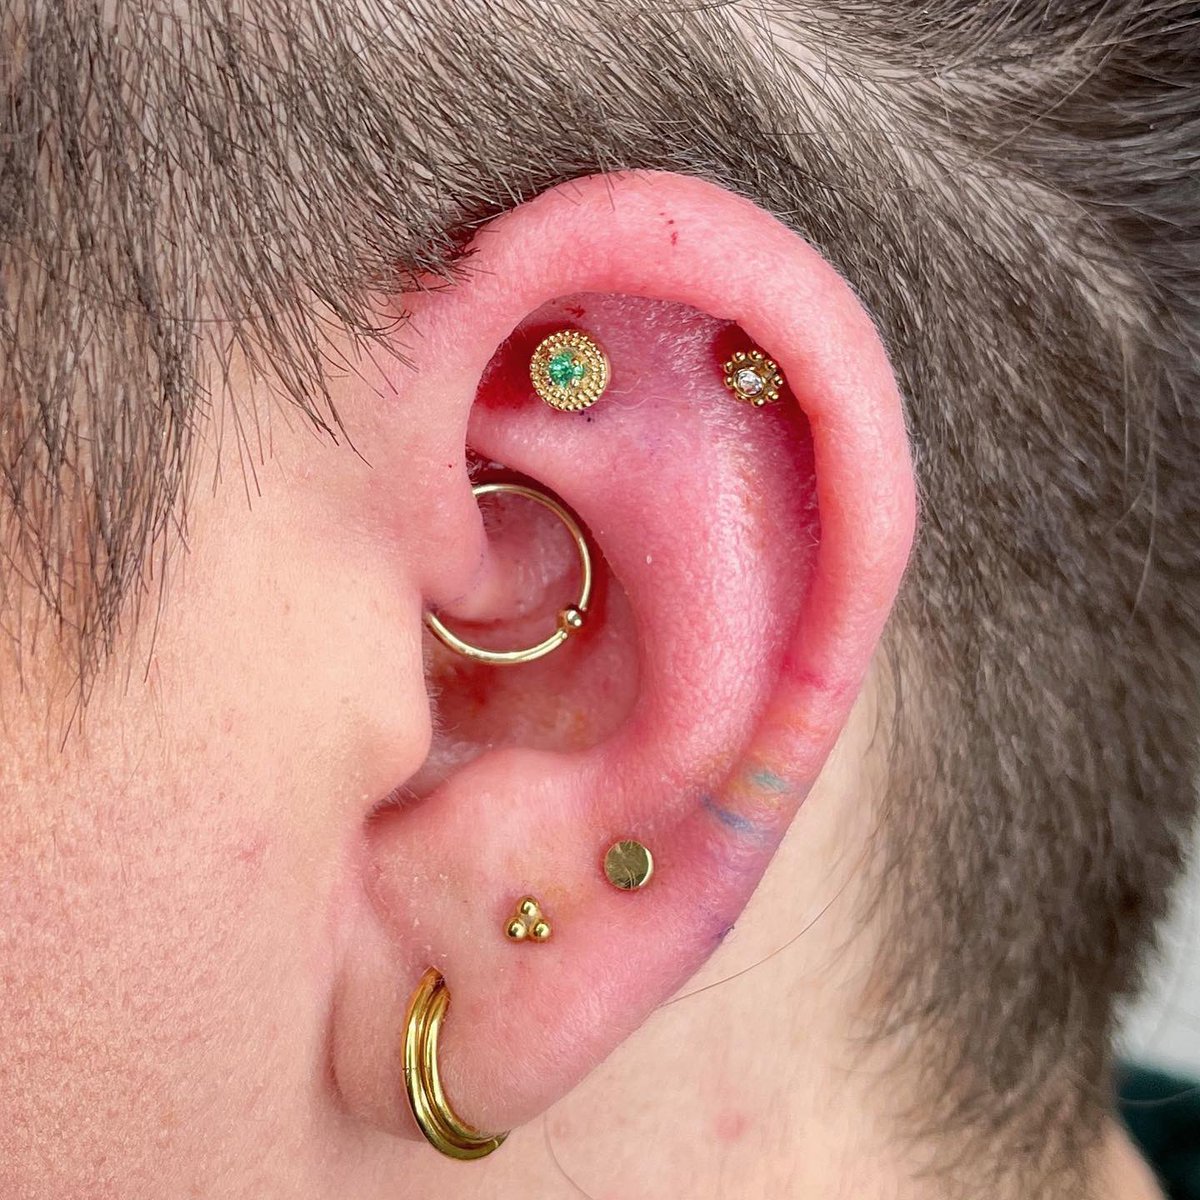 Fresh three piece. Faux rook, daith, and third lobe piercing drenched in yellow gold. #safepiercing #curatedear